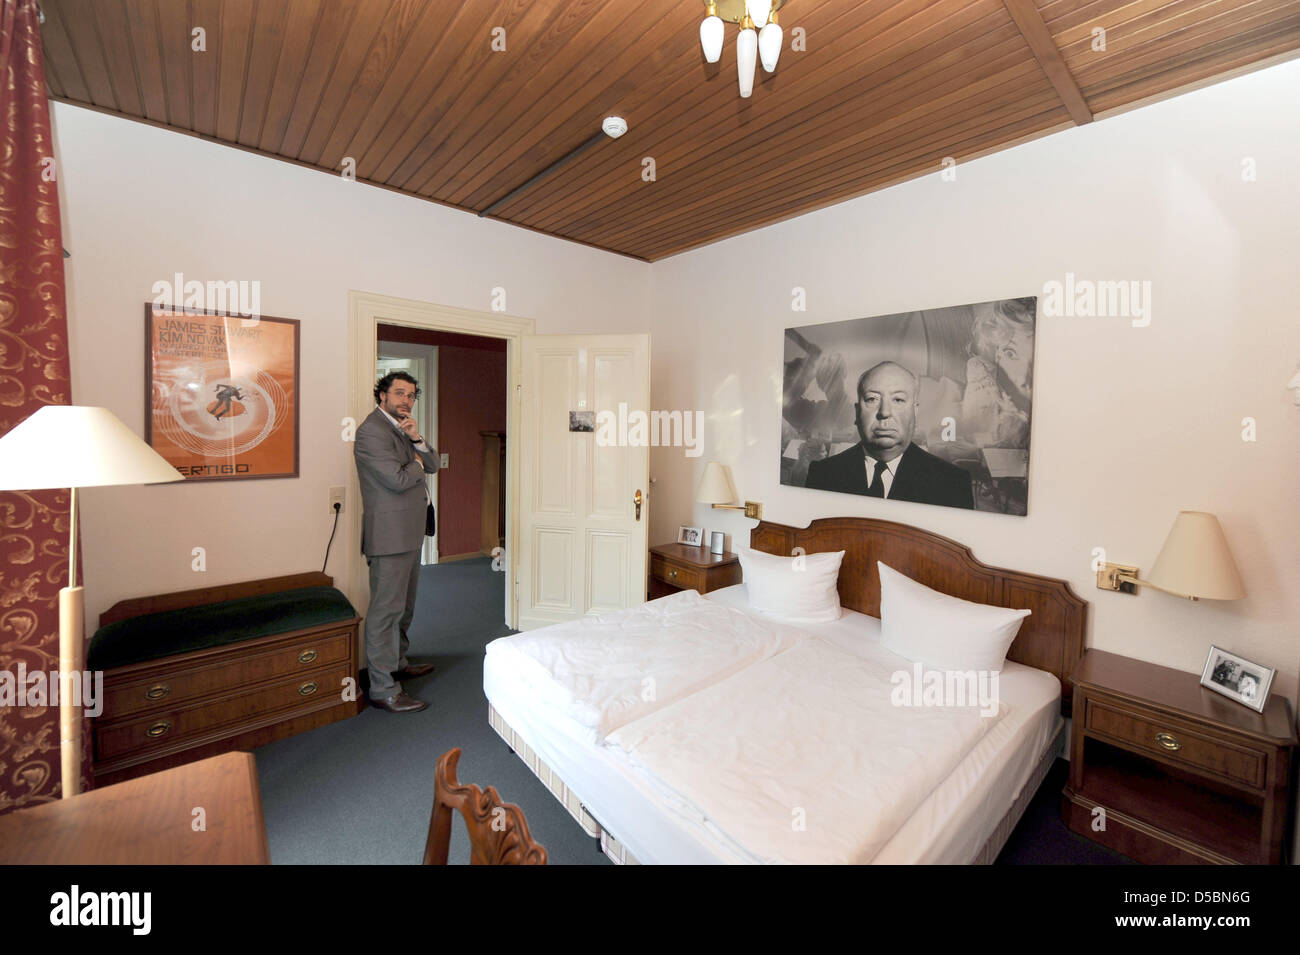 Hotel manager Christoph Boehnk stands in the Hitchcock room at the newly established murder mytery hotel in Hillesheim, Germany, 8 September 2010. The murder mystery hotel is the first of its kind to open its doors in Germany featuring individually designed rooms in the fashion of various mystery story themes from the tales of Sherlock Holmes, Miss Marple, Hercule Poirot, James Bon Stock Photo